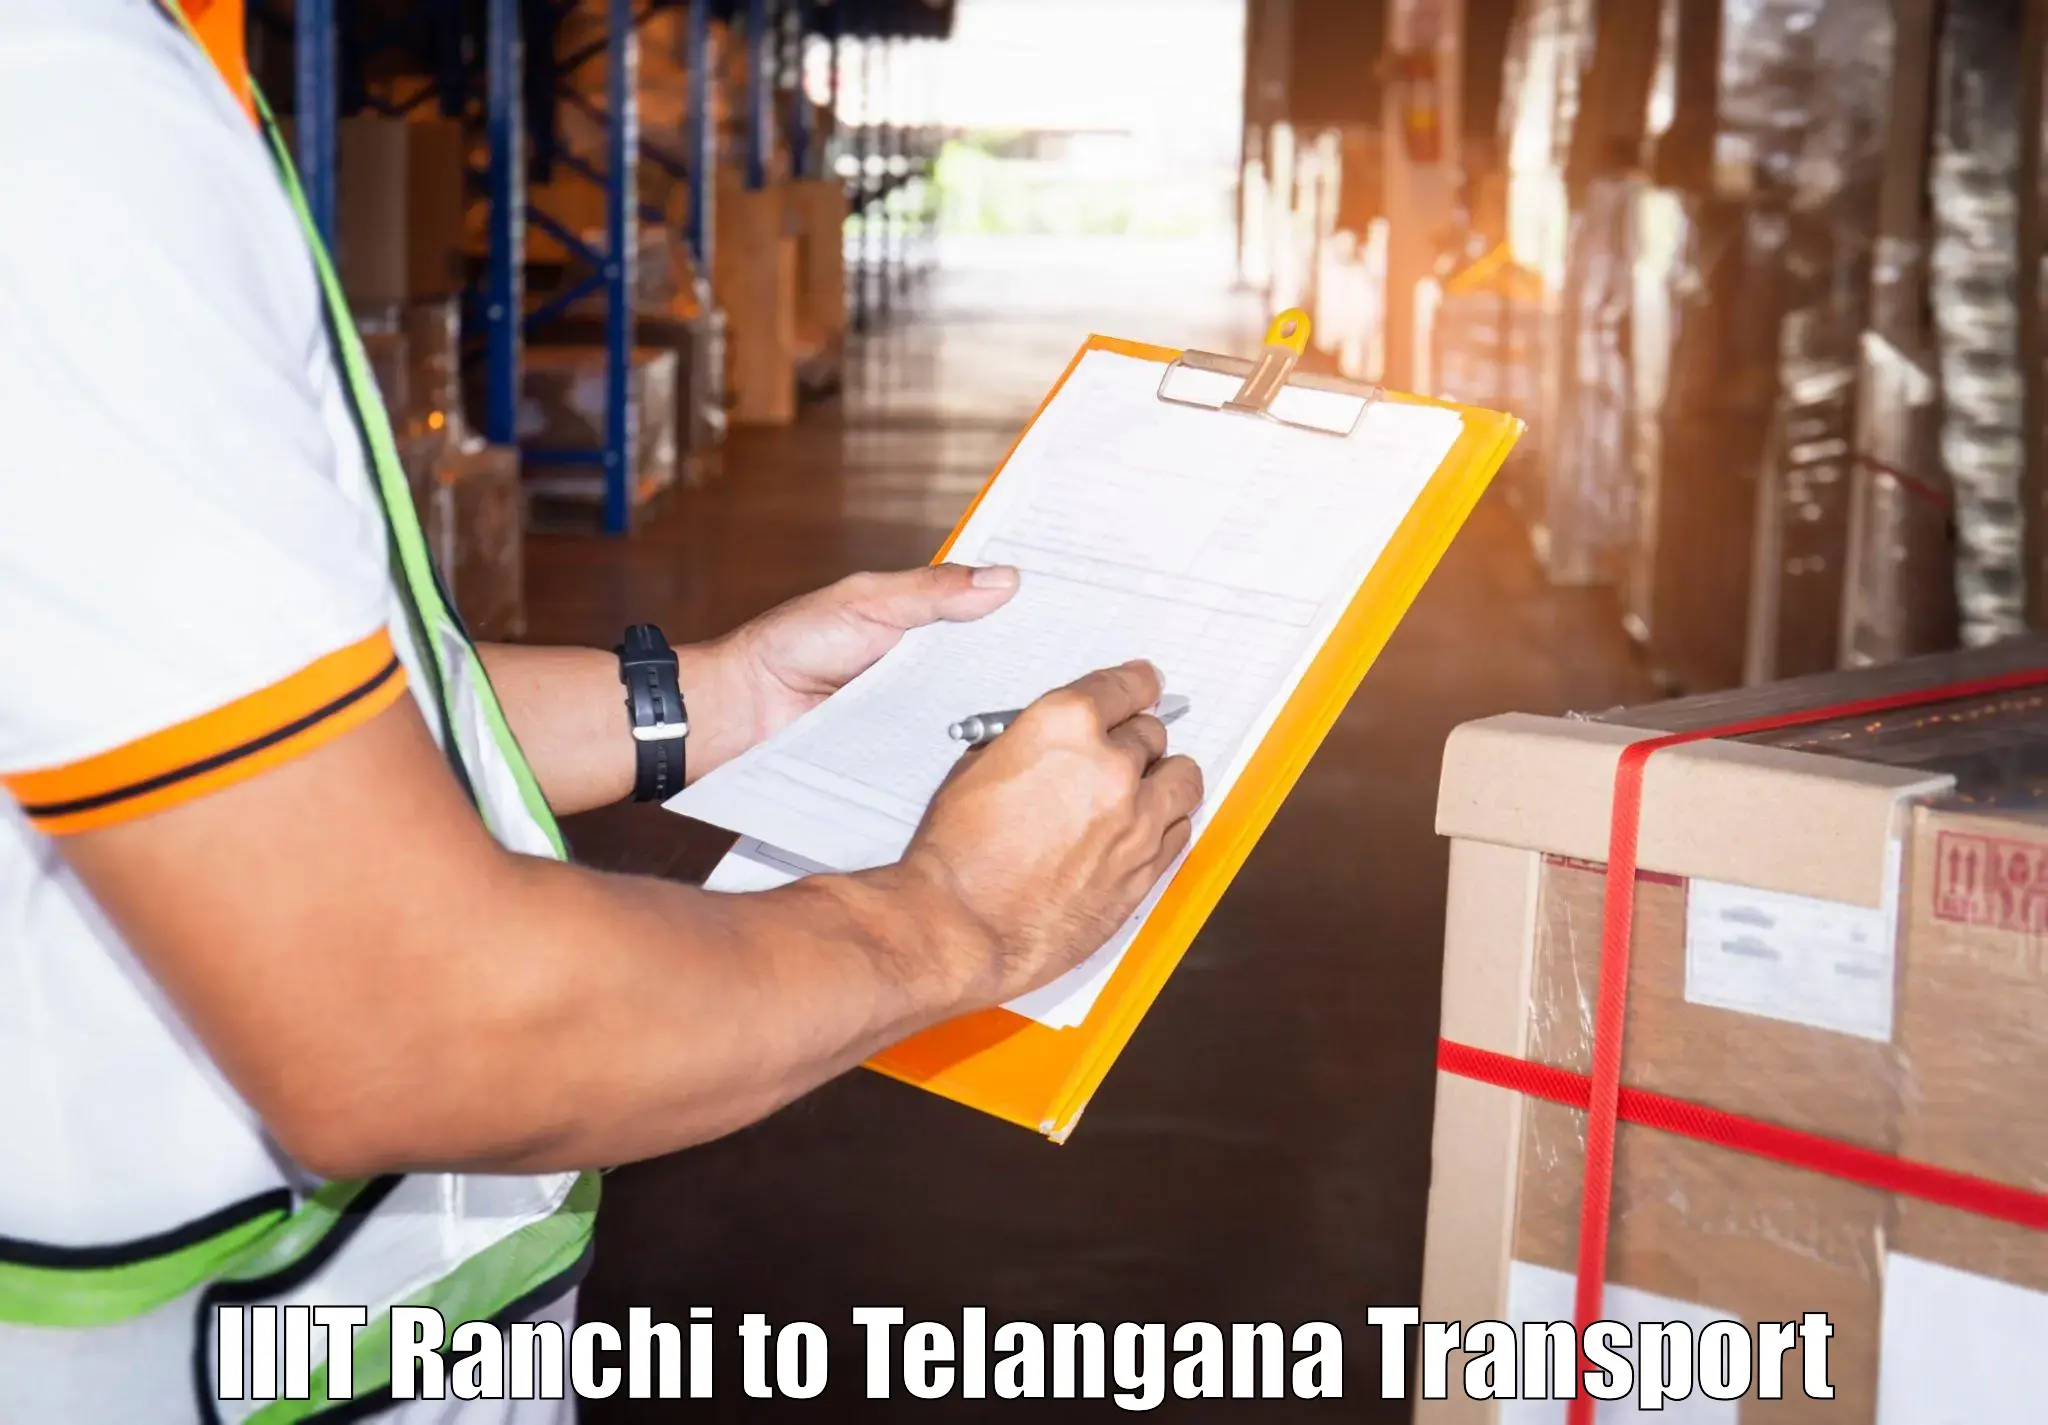 Truck transport companies in India in IIIT Ranchi to Yerrupalem